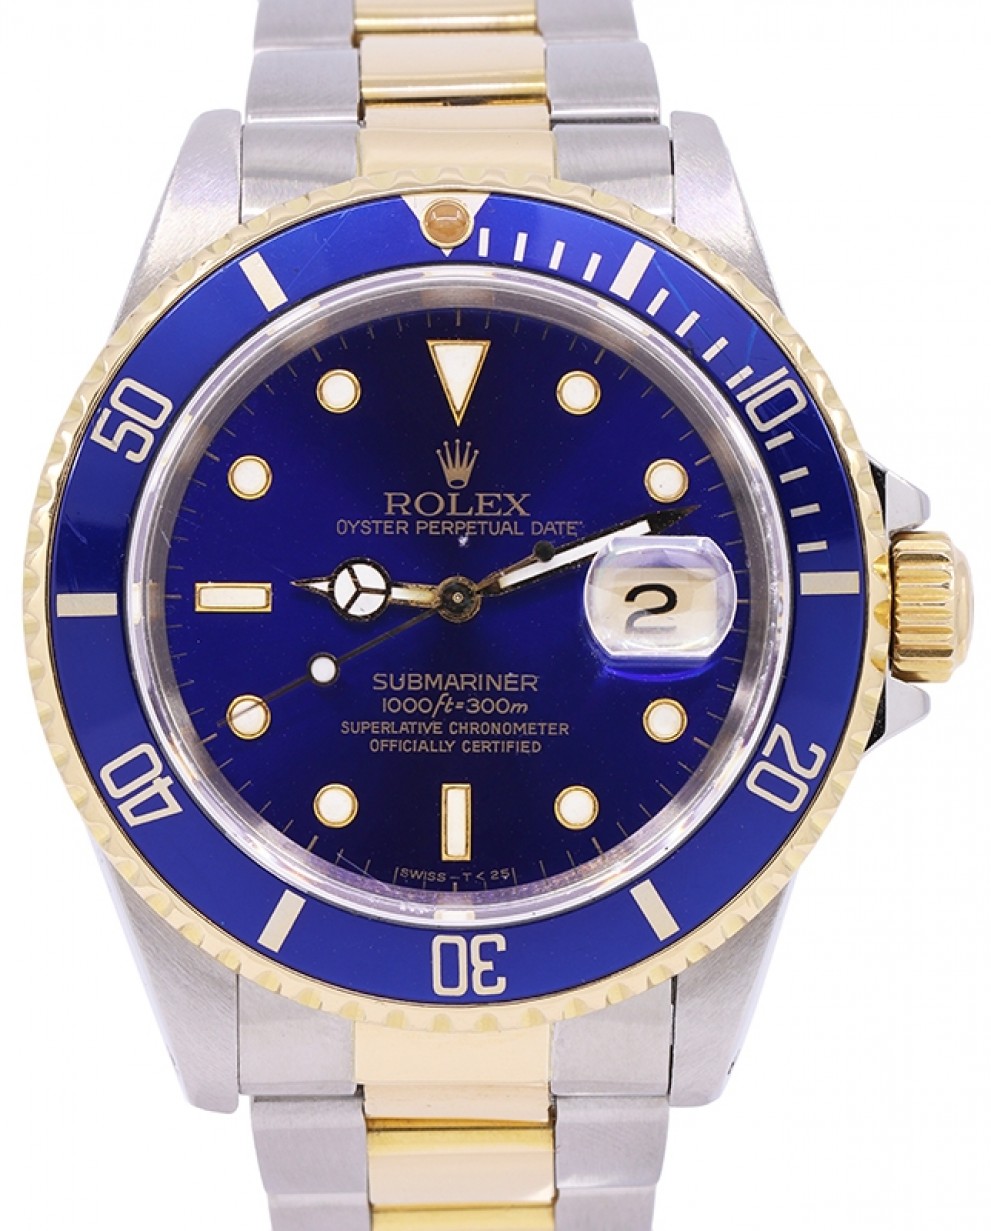 Rolex Submariner 16613 40mm Blue 18k Yellow Gold Stainless Steel